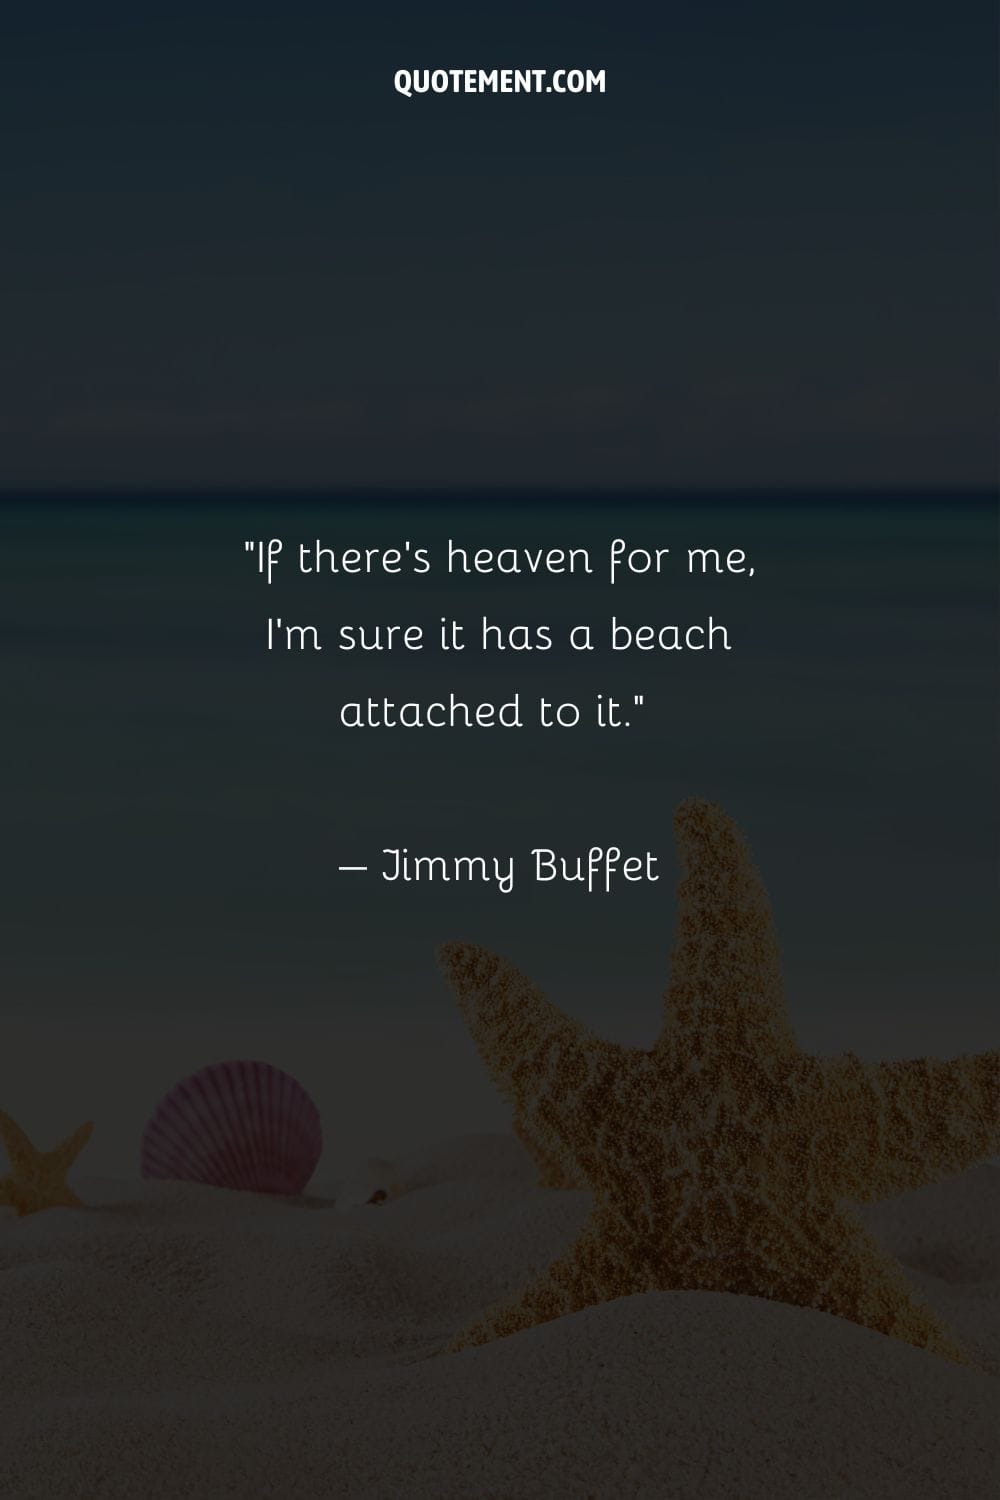 “If there’s heaven for me, I’m sure it has a beach attached to it.” – Jimmy Buffet